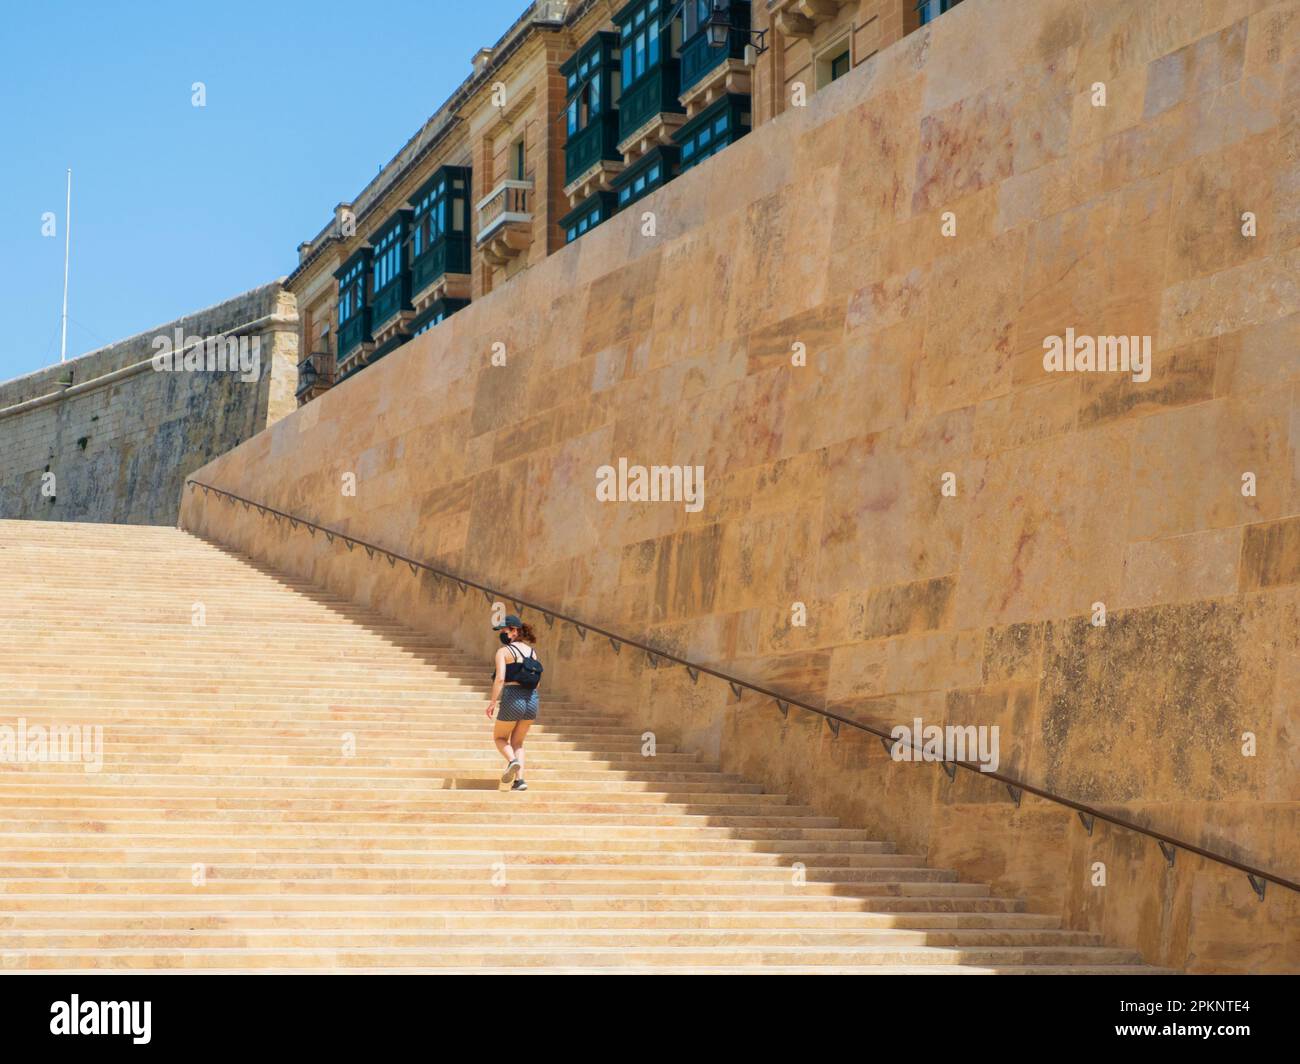 Valletta, Malta - May, 2021: Young woman climbs the huge stairs next to the city walls near the Valletta city gate. Europe Stock Photo